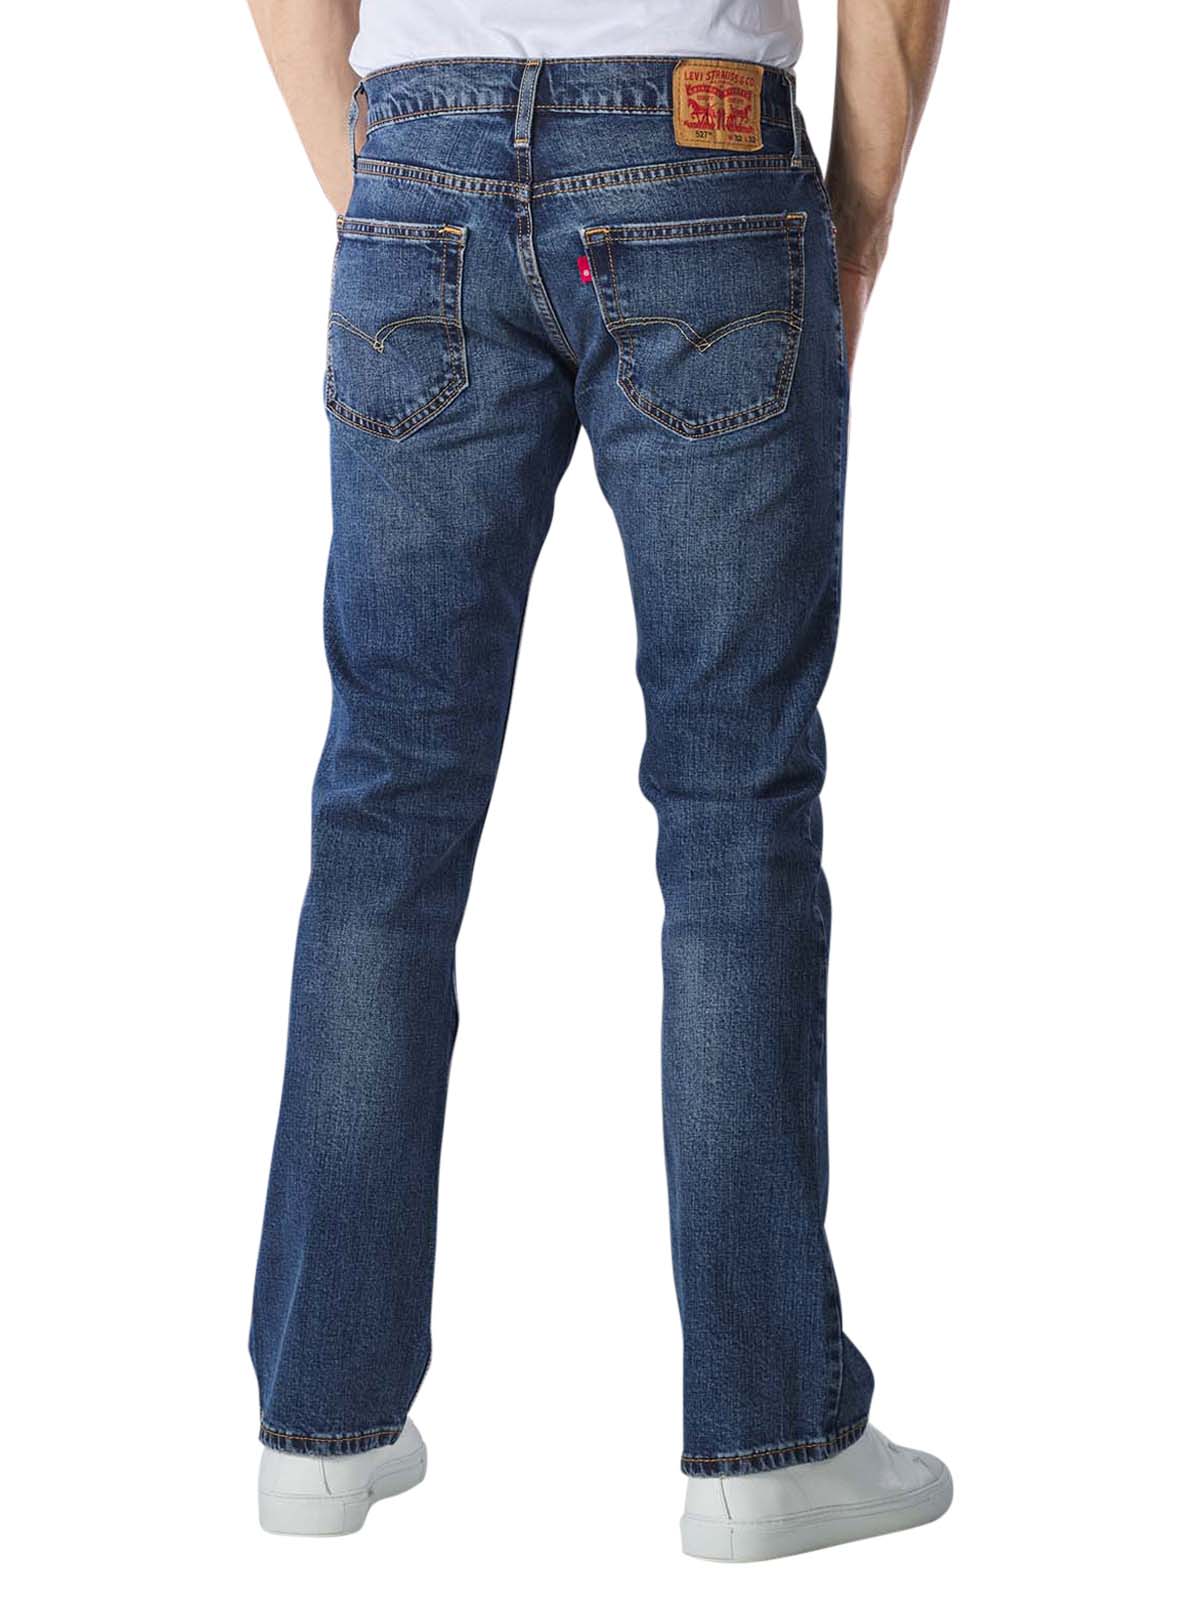 Levi's 527 Jeans Slim Bootcut quickstep Levi's Men's Jeans | Free Shipping  on  - SIMPLY LOOK GOOD